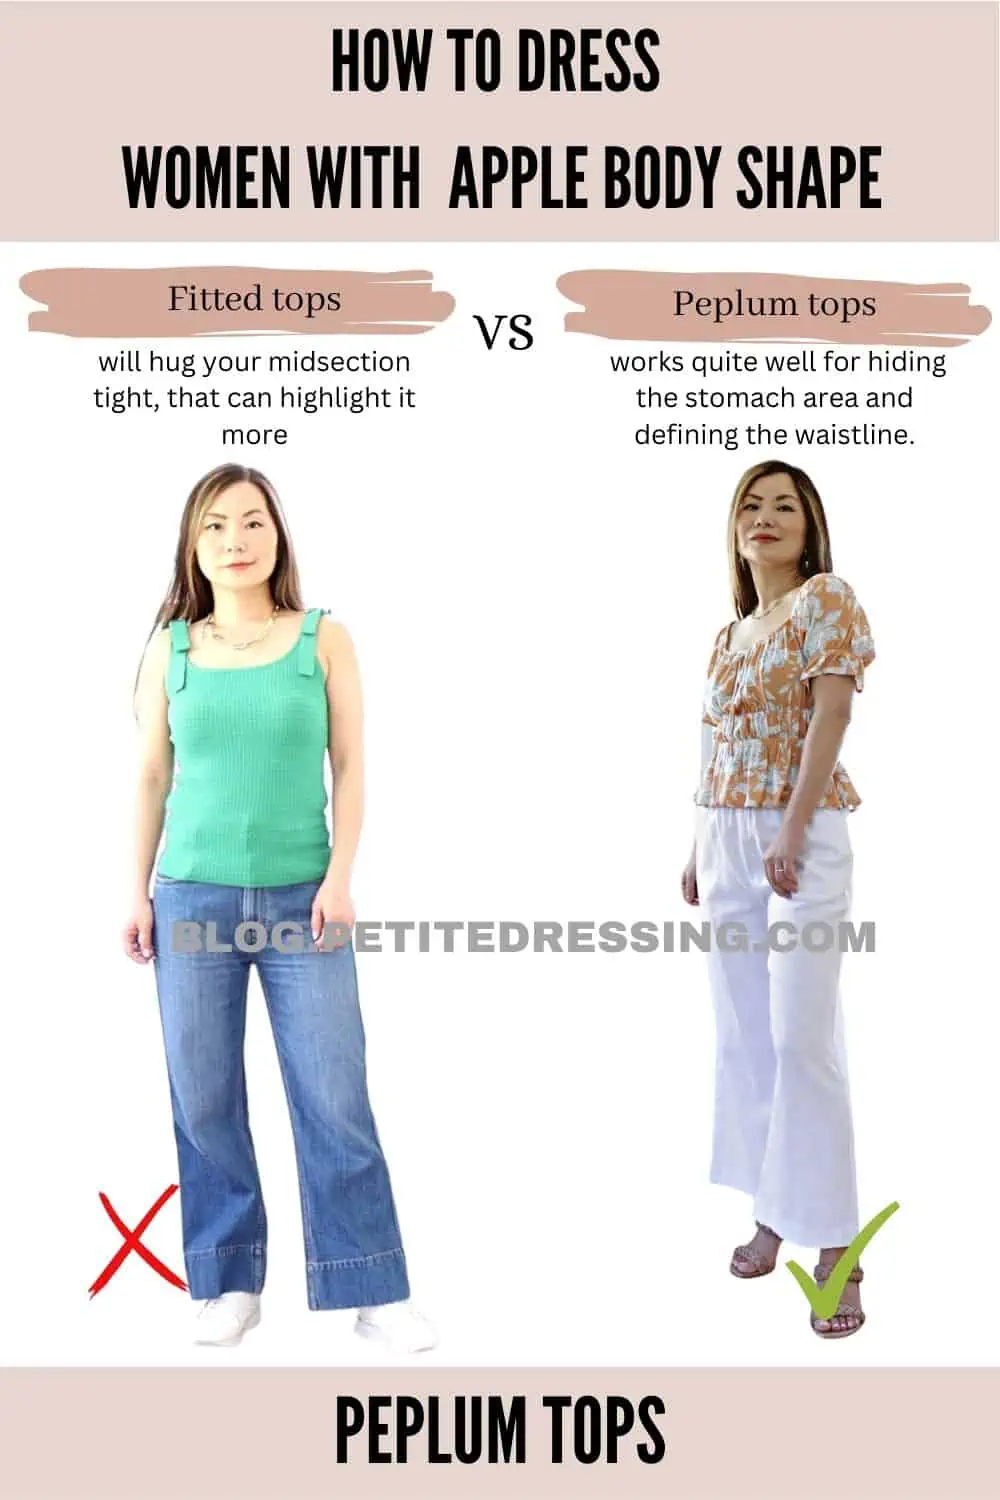 Apple Shaped Body: The Ultimate Styling Guide - Petite Dressing